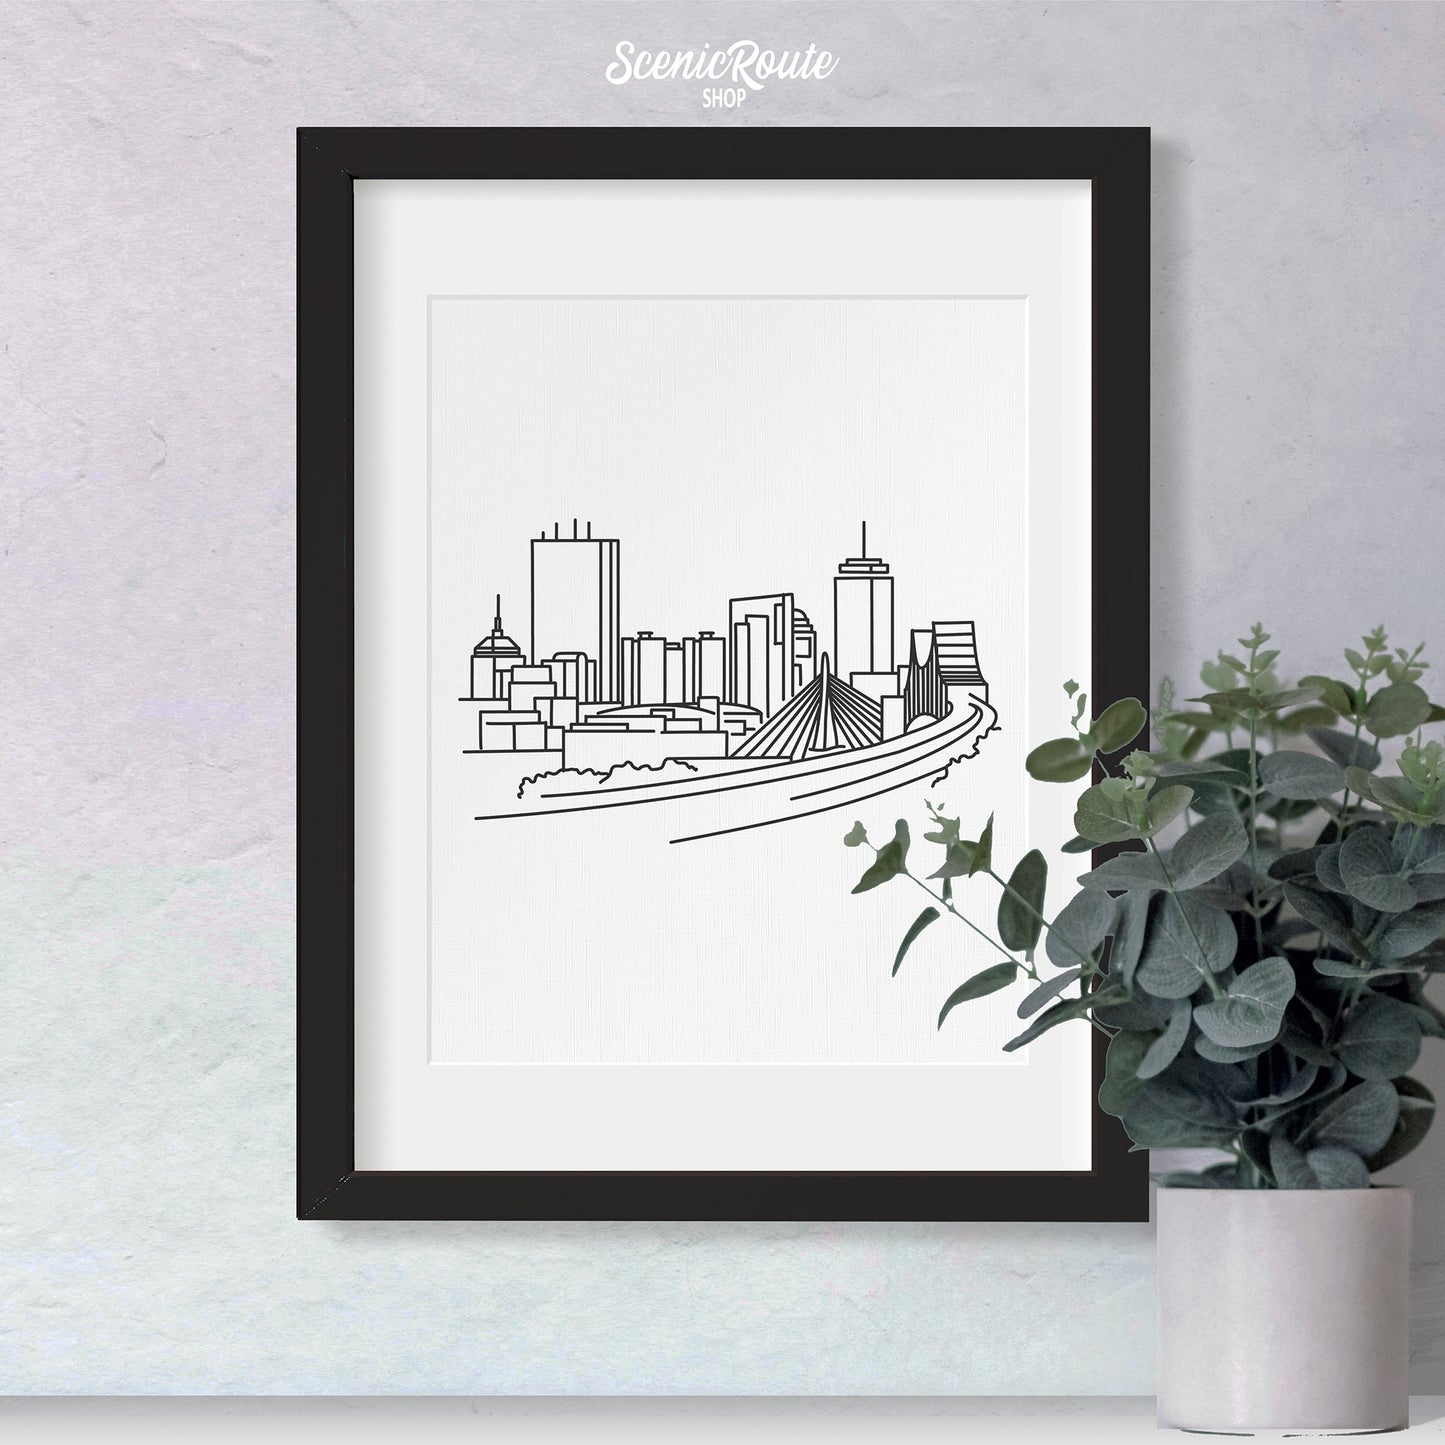 A framed line art drawing of the Boston Skyline with a potted plant